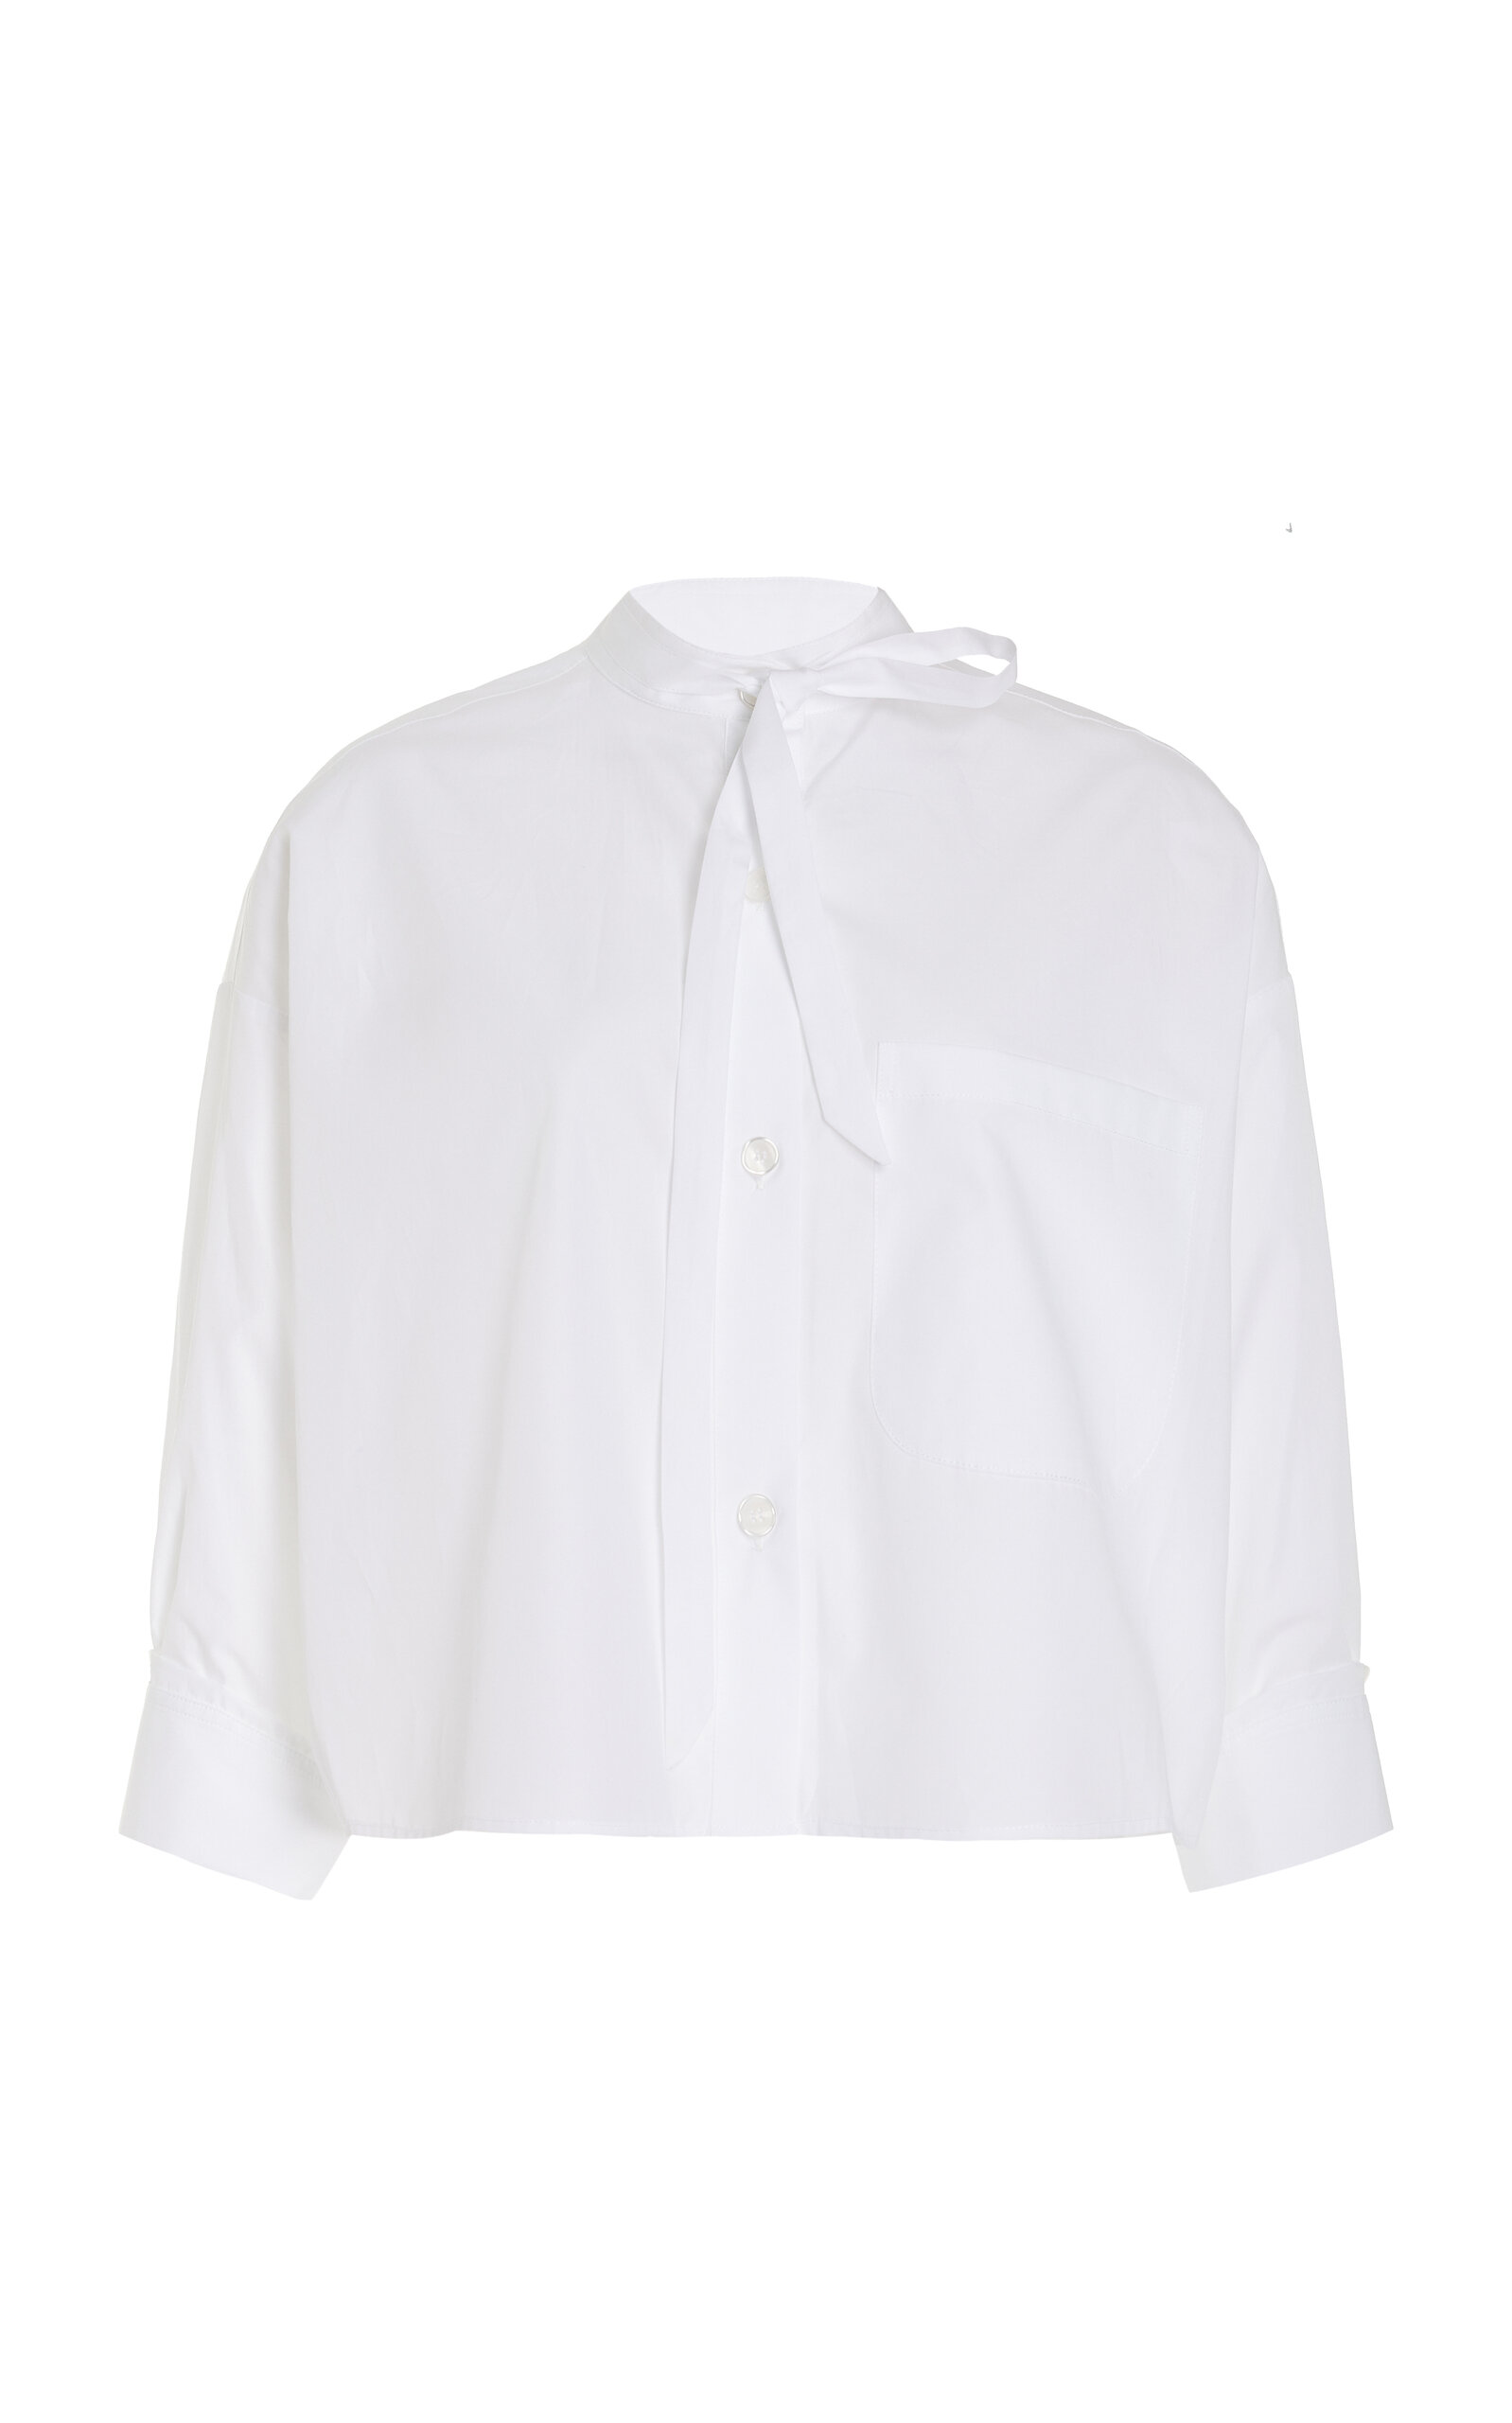 TWP DARLING TIE-DETAILED COTTON SHIRT